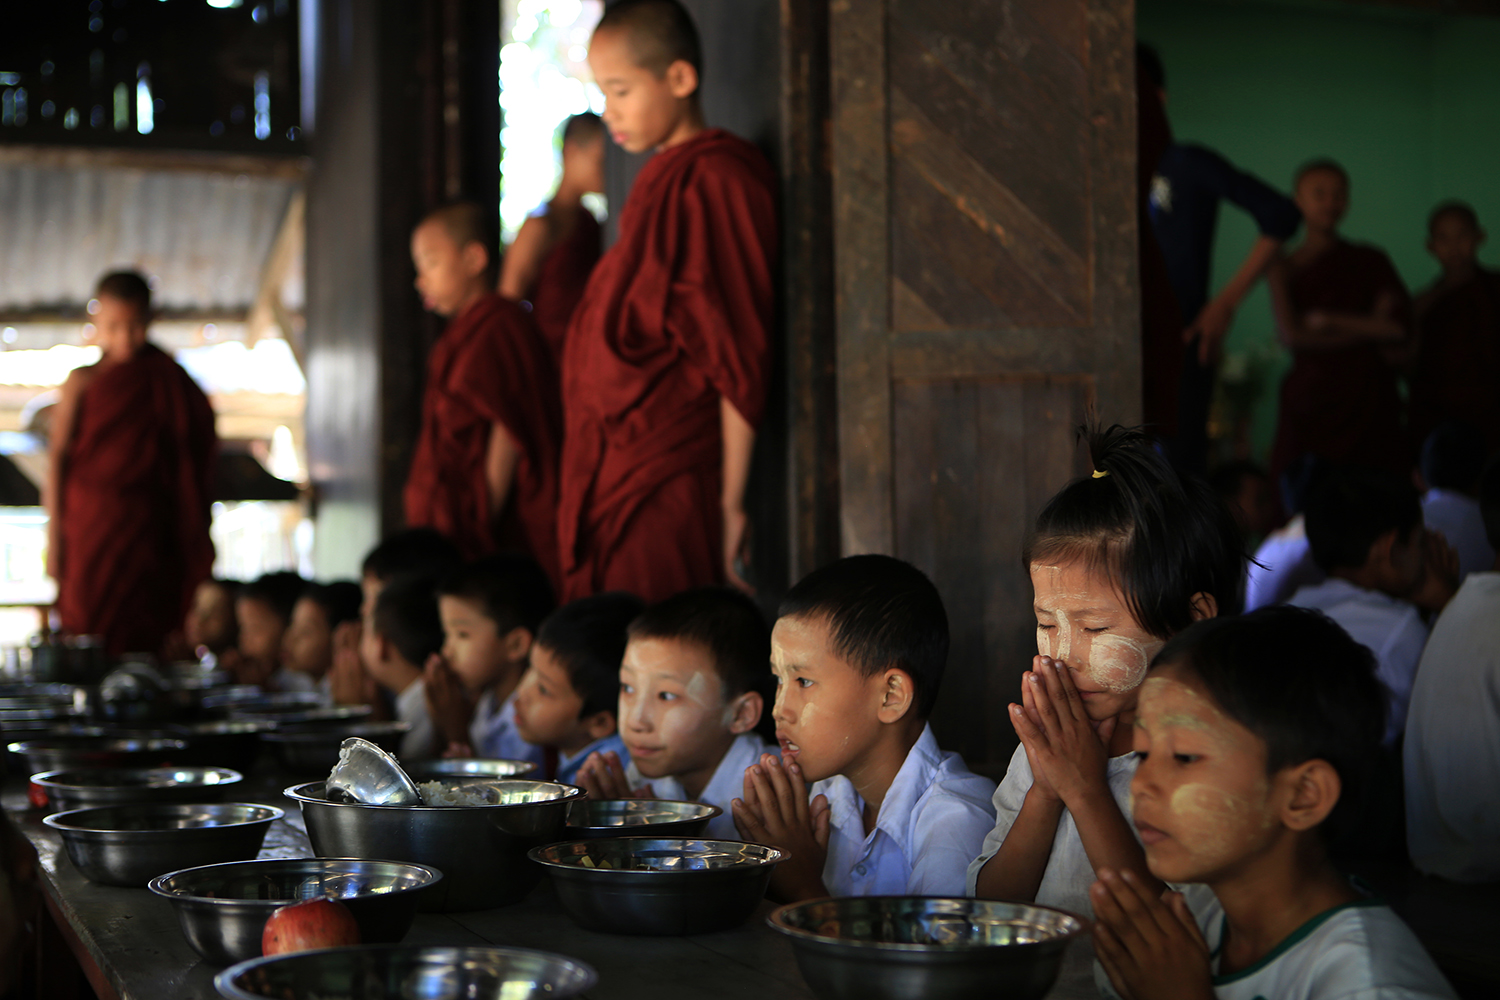  Monasteries are establishments of social welfare in Myanmar, taking in orphans and the less fortunate. © Gail Fisher for Los Angeles Times 